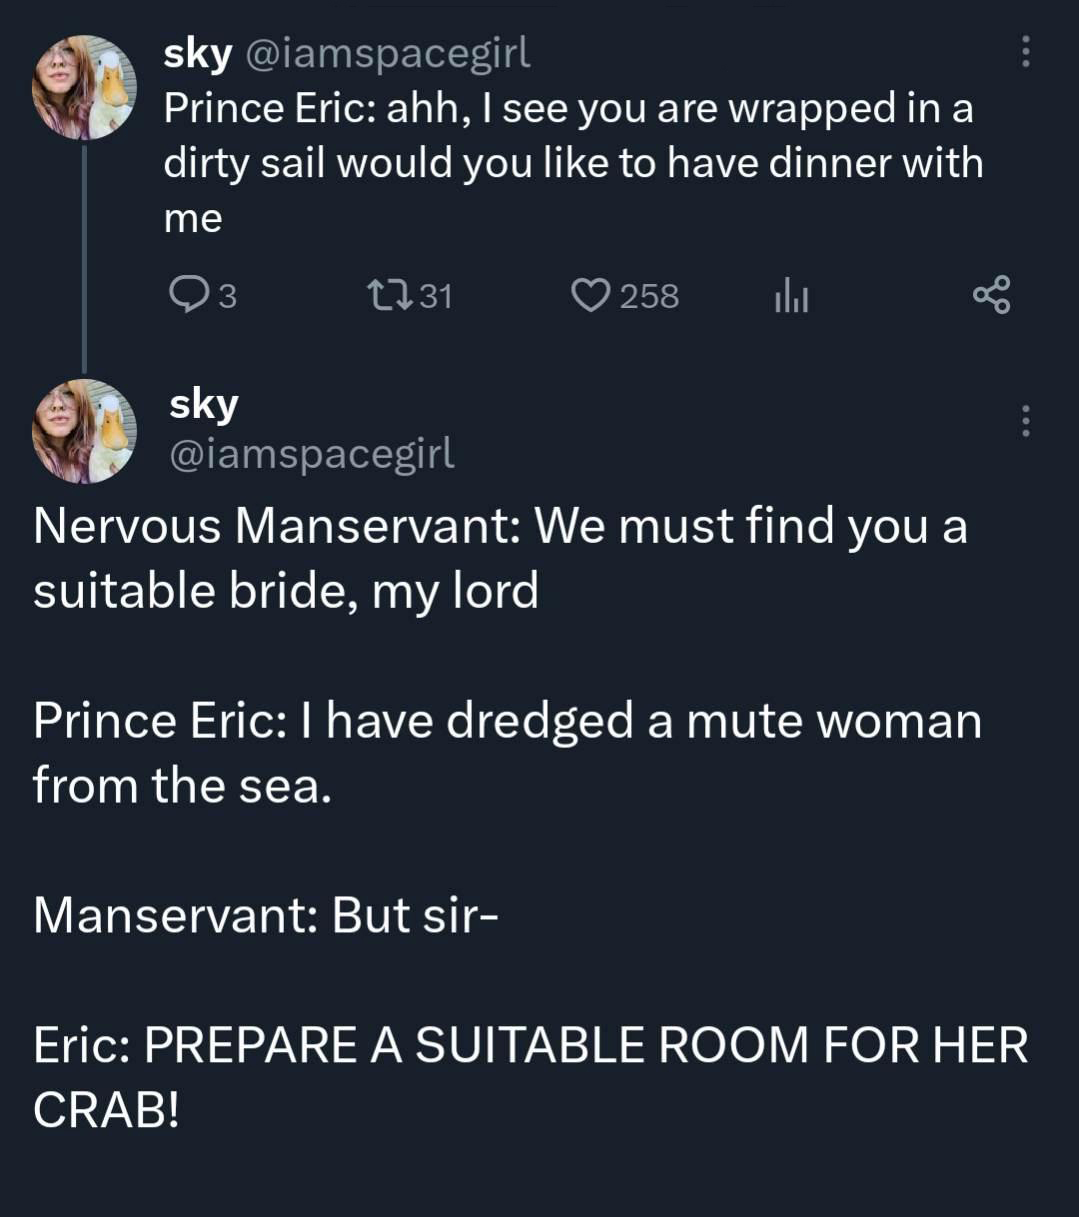 fresh memes -  atmosphere - sky Prince Eric ahh, I see you are wrapped in a dirty sail would you to have dinner with me Q3 sky 131 258 ala Nervous Manservant We must find you a suitable bride, my lord Prince Eric I have dredged a mute woman from the sea. 